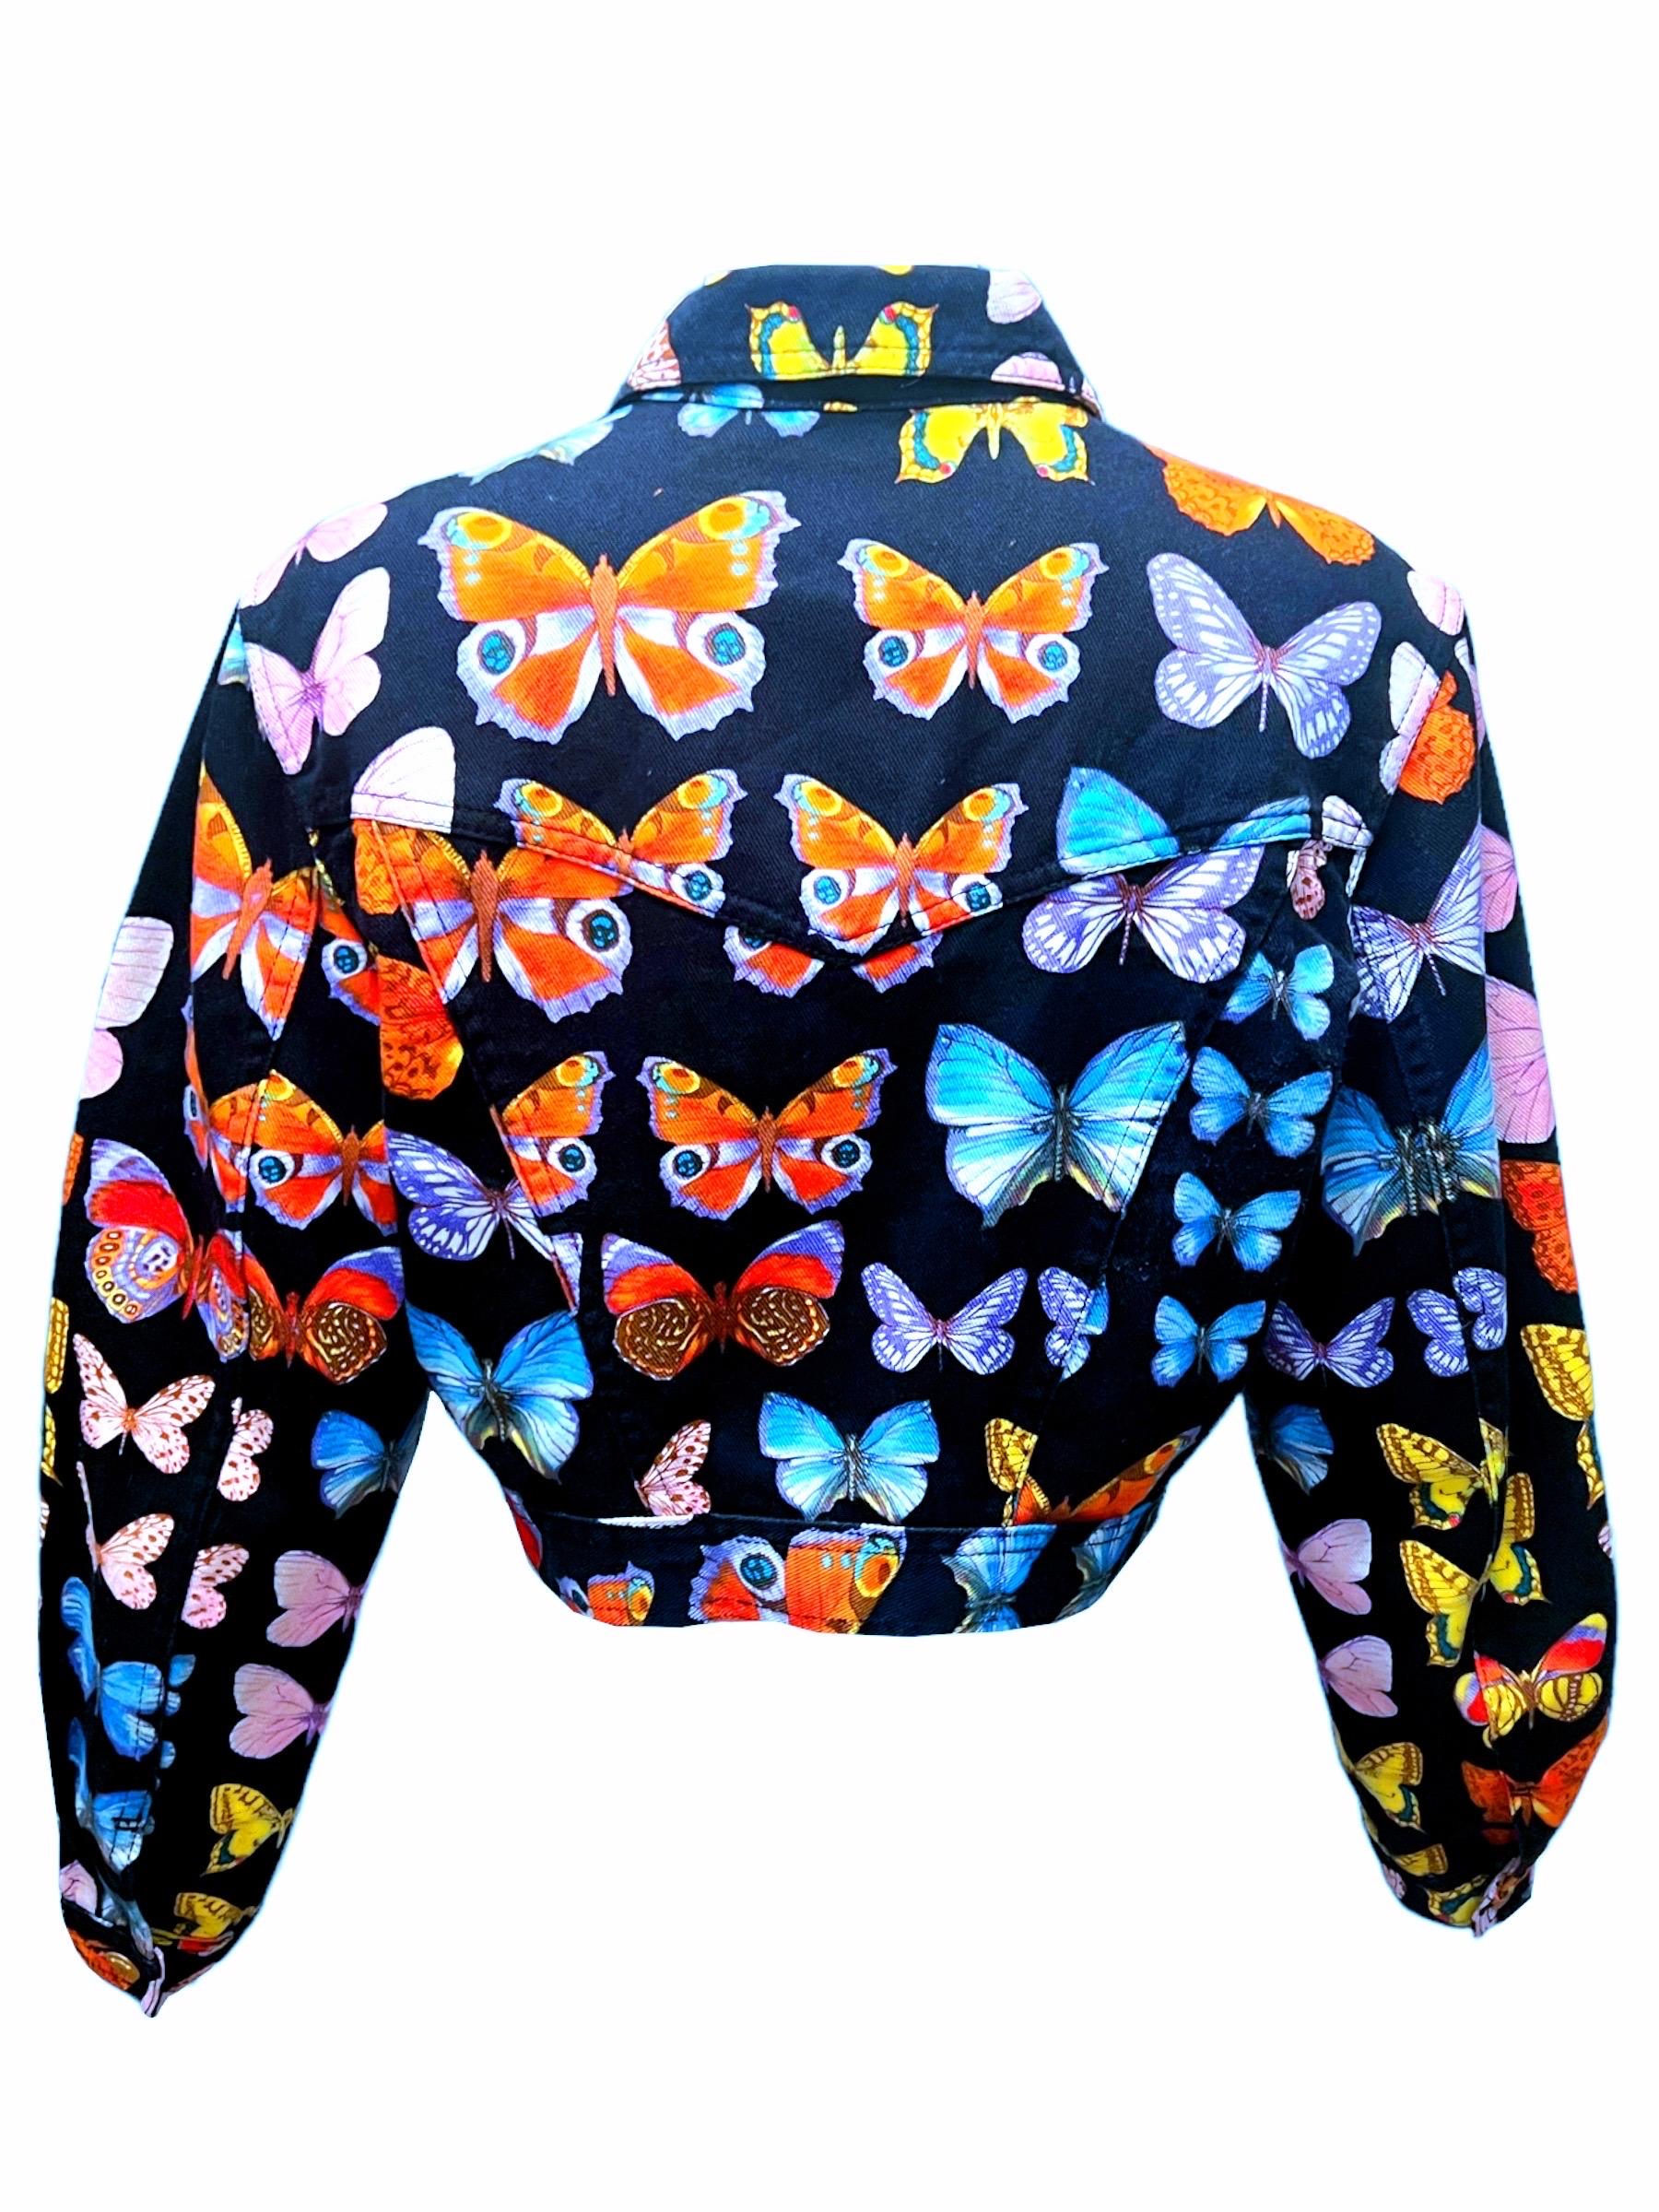 S/S 1995 Gianni Versace Butterfly Printed Jacket For Sale 1